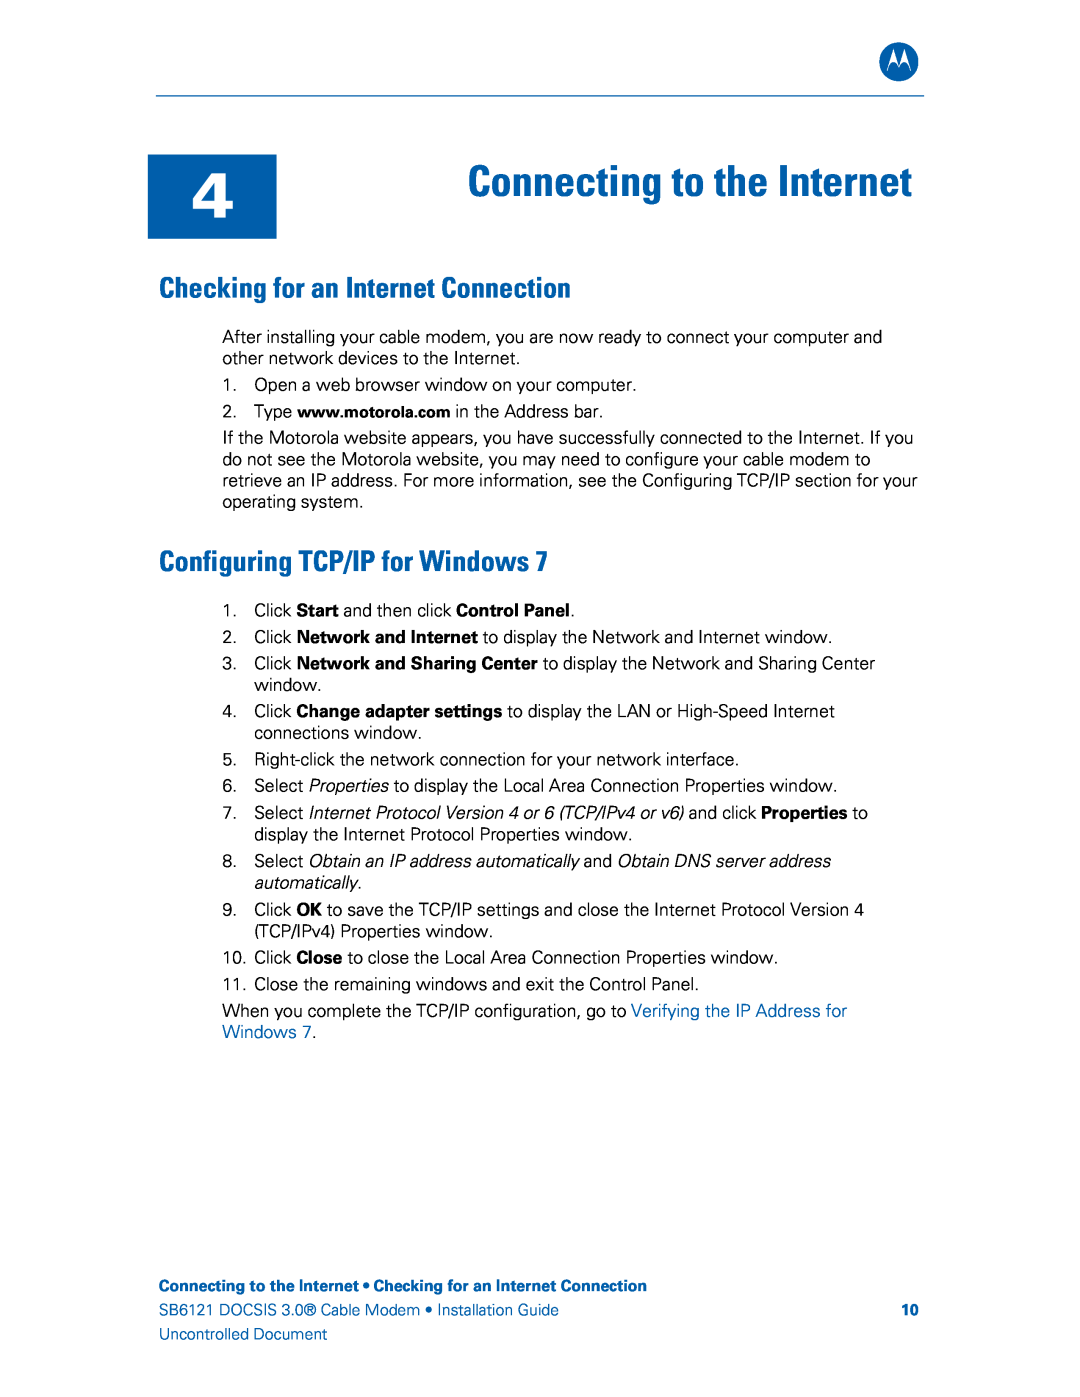 Motorola SB6121 manual Checking for an Internet Connection, Configuring TCP/IP for Windows, Connecting to the Internet 